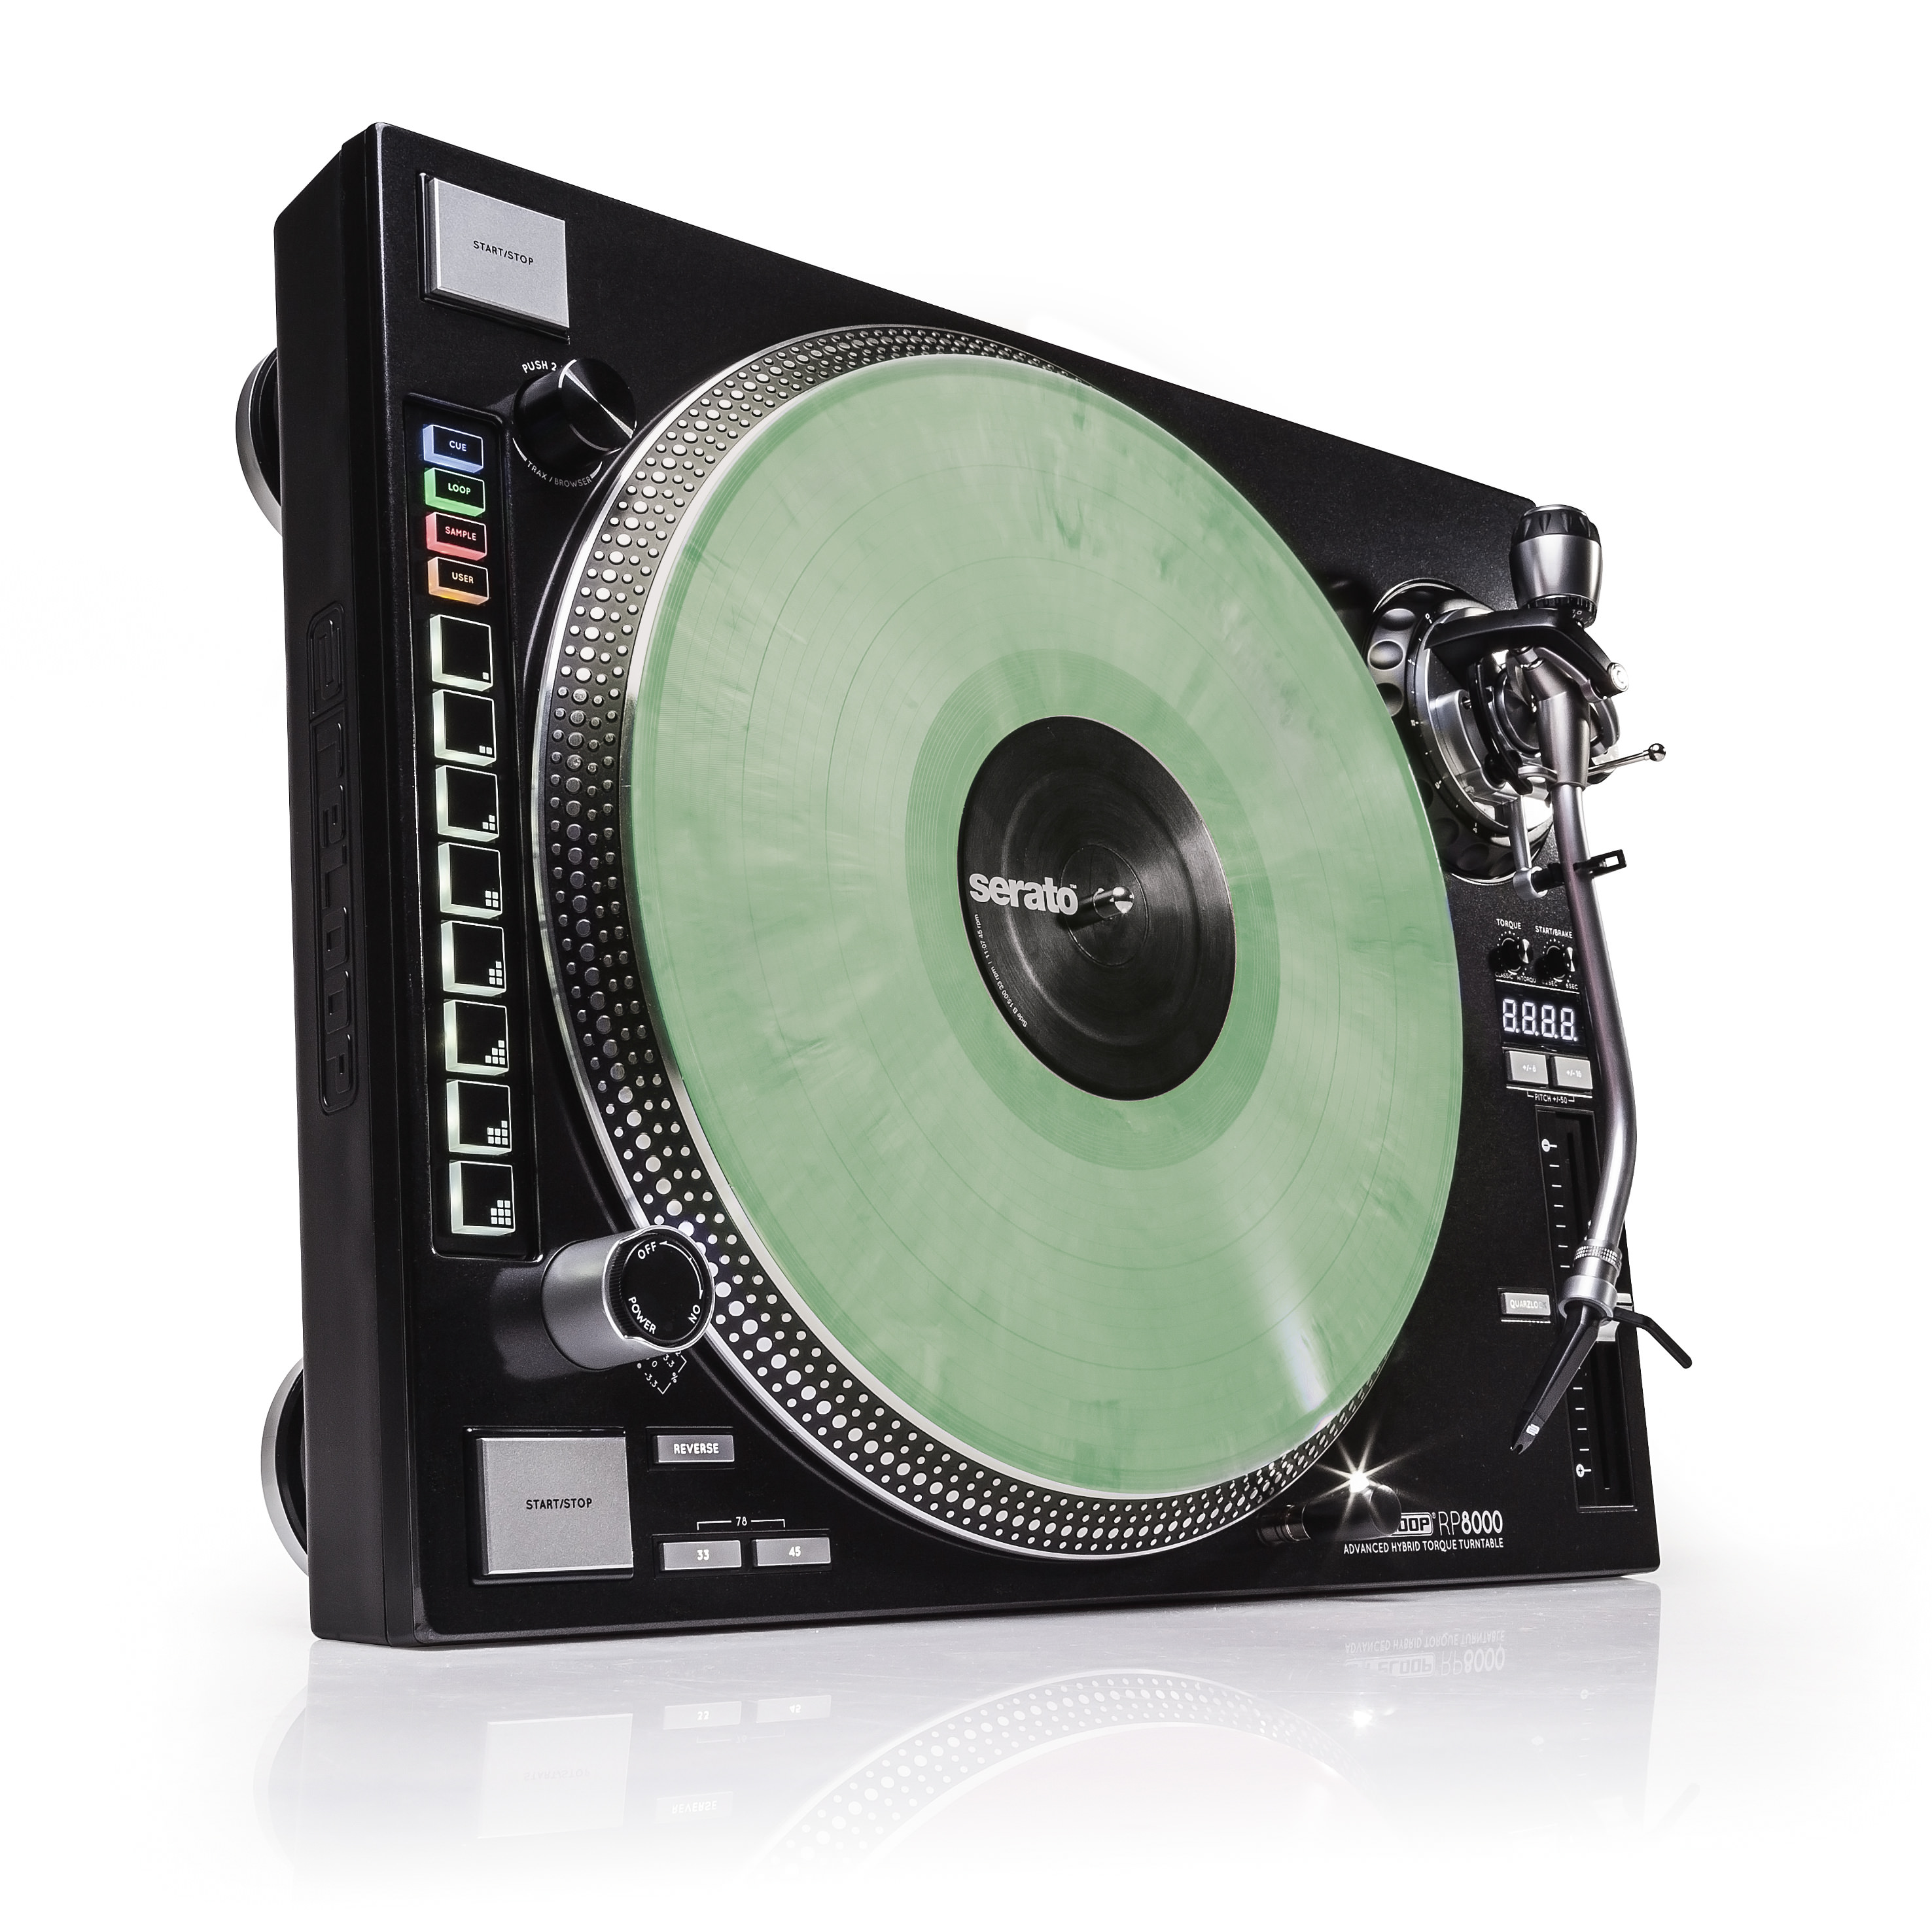 http://www.nerdydj.com/wp-content/uploads/2014/05/reloop-rp-8000-review-reloop-turntables-compared-to-technics.jpg